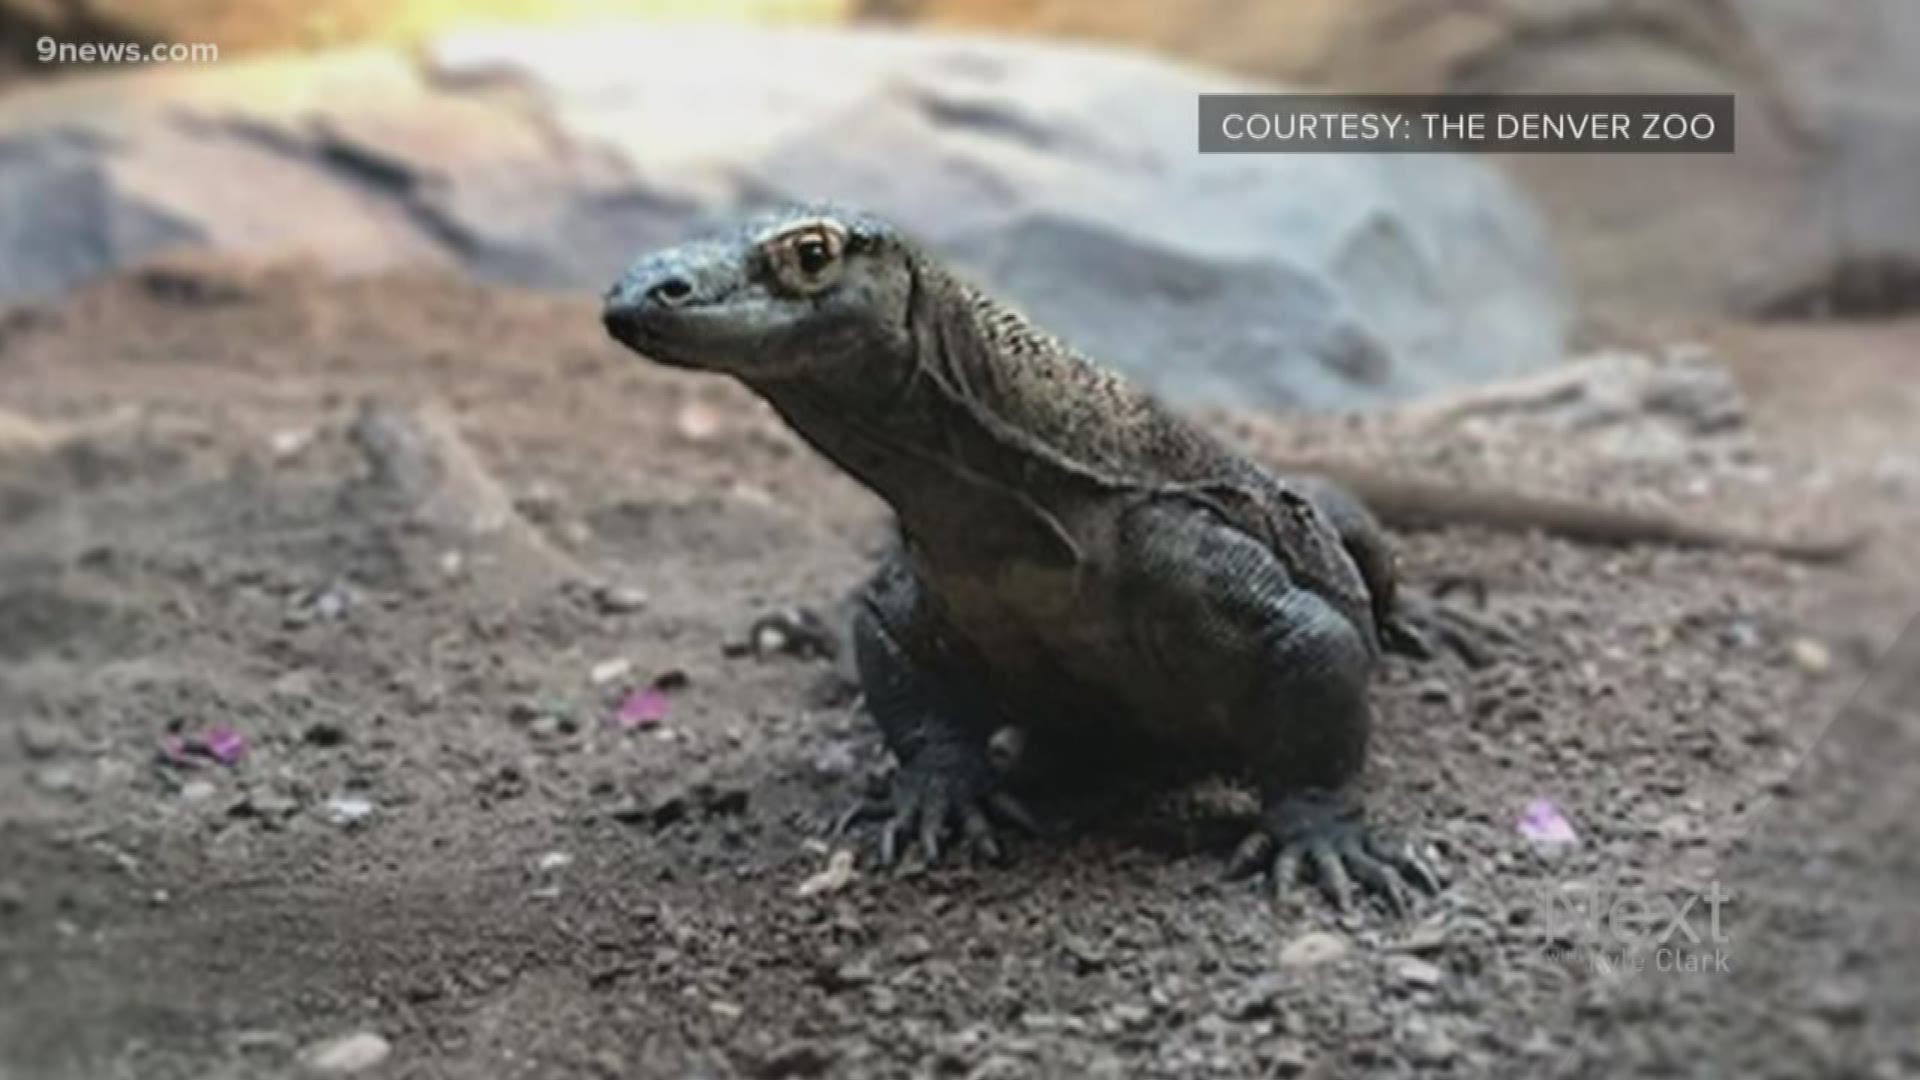 The Komodo dragon just arrived from San Antonio Zoo and is already out and about for visitors to see.